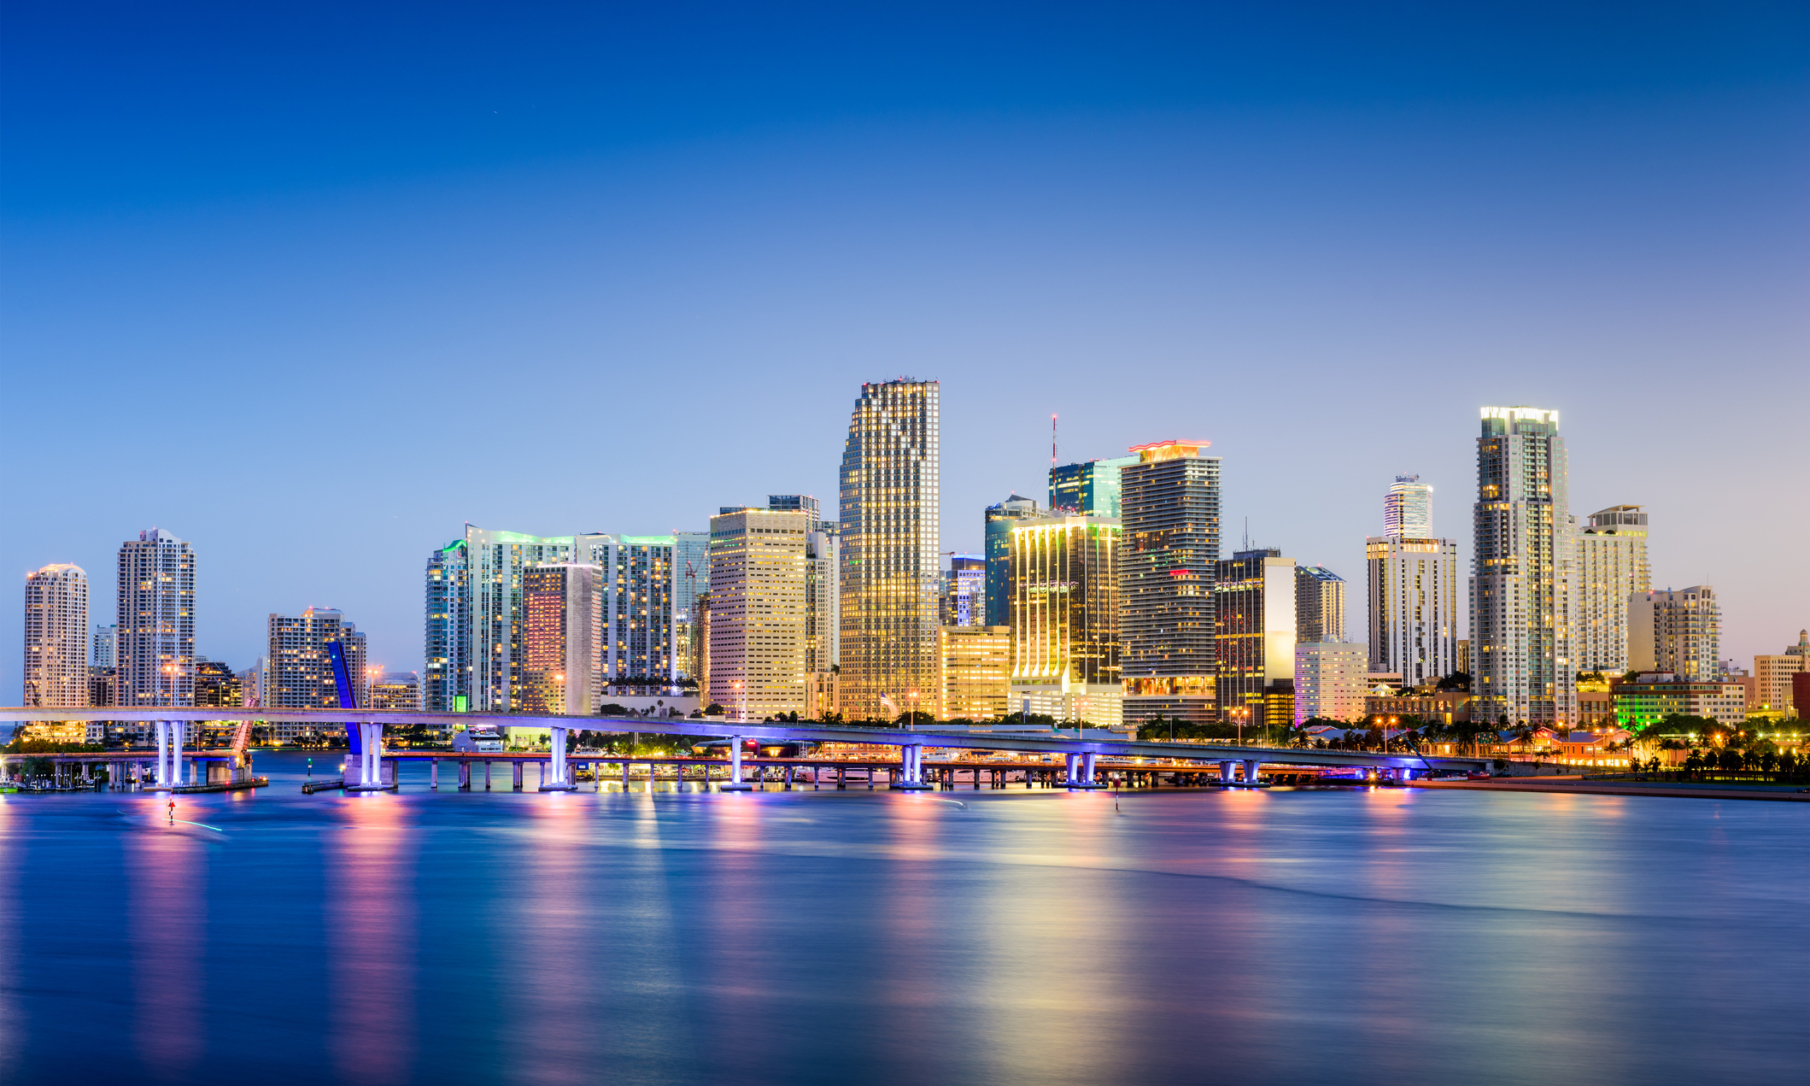 Miami ranked 7th most in-demand city based on 2020 mortgage loans